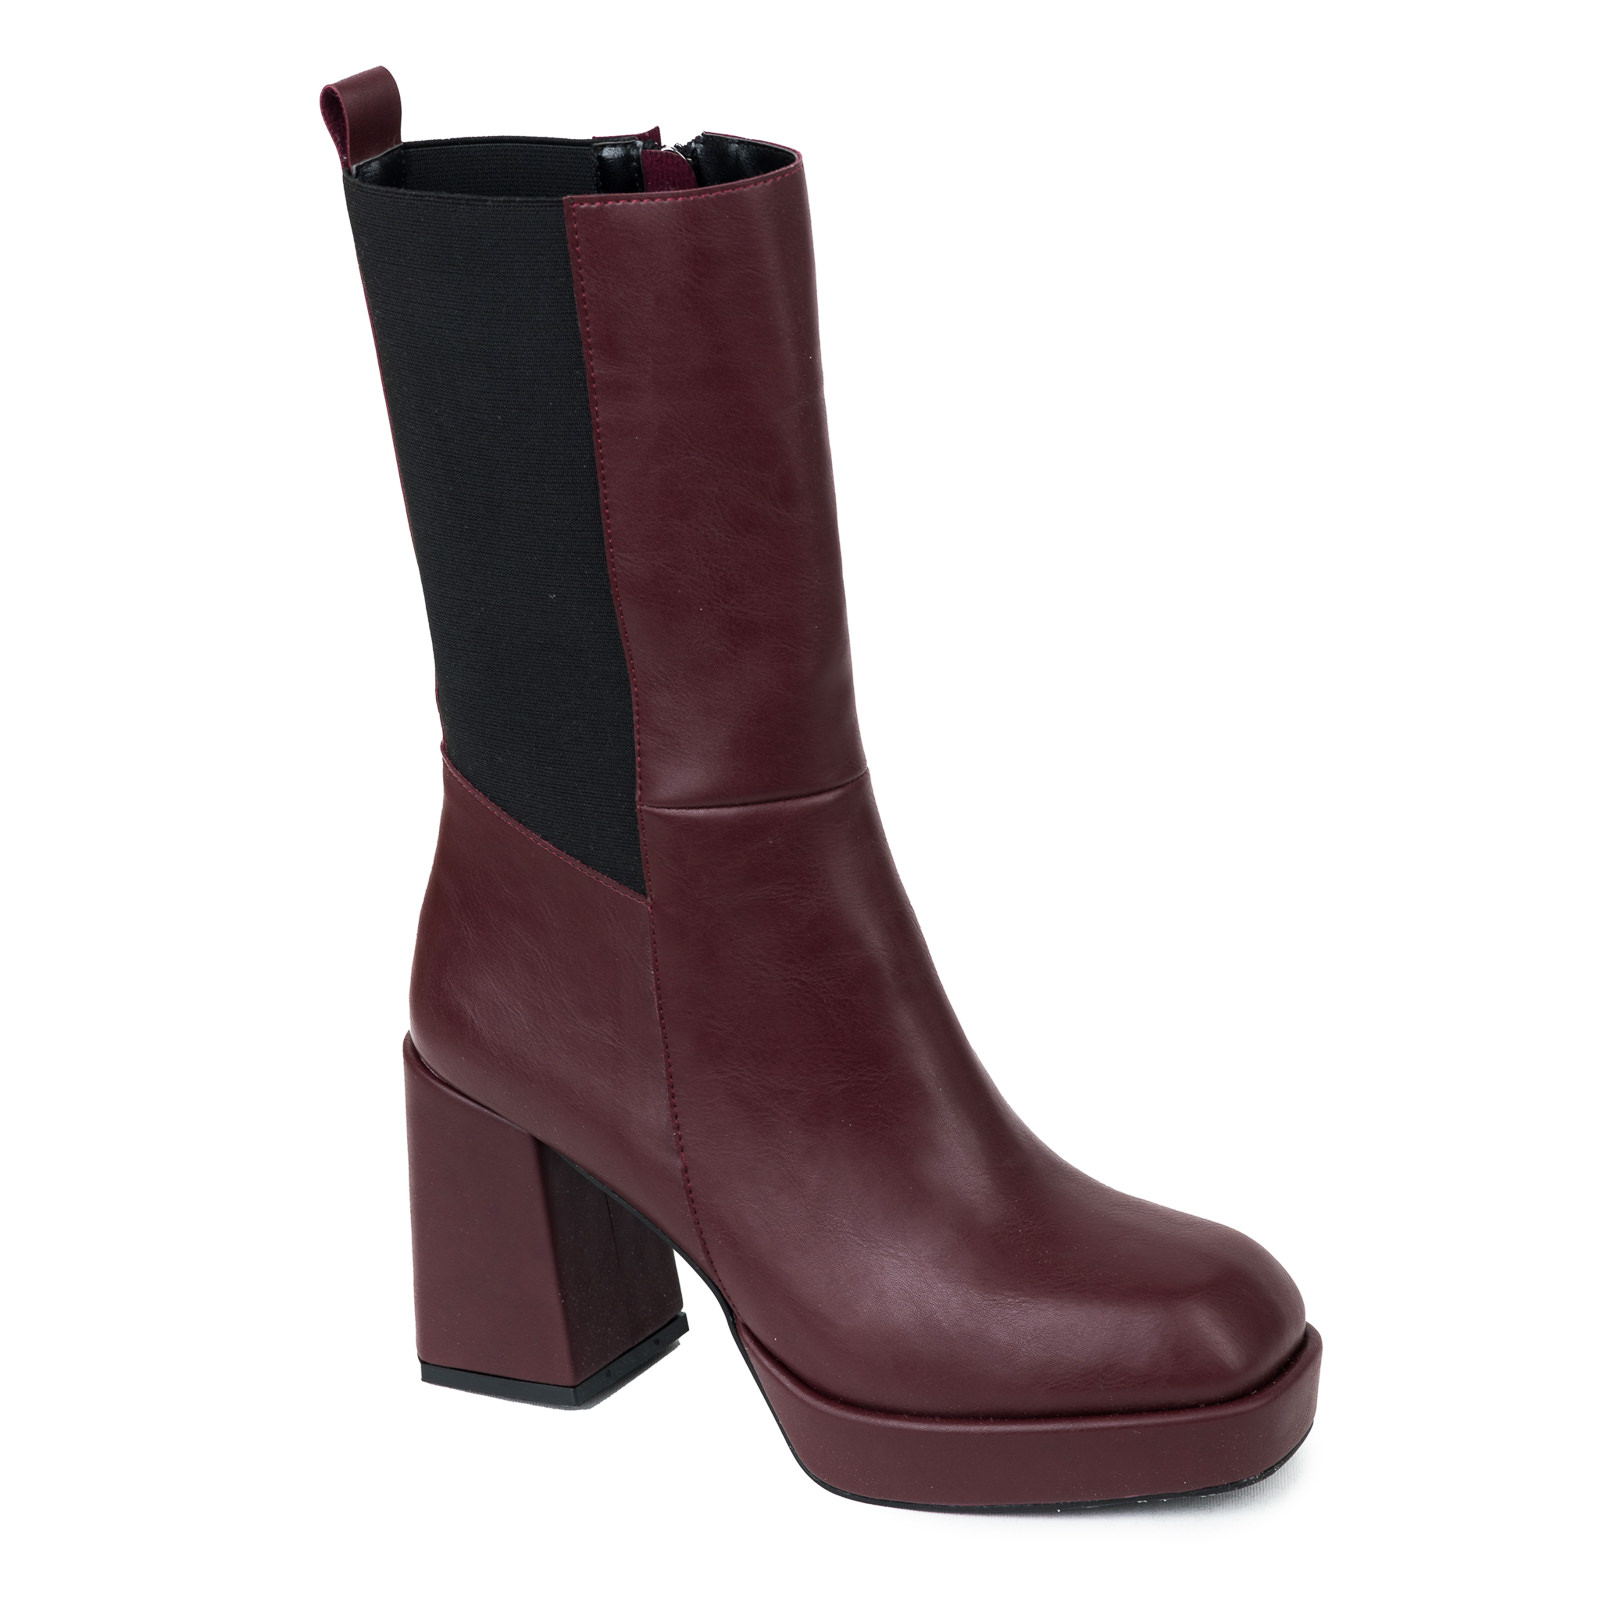 Women ankle boots B553 - WINE RED